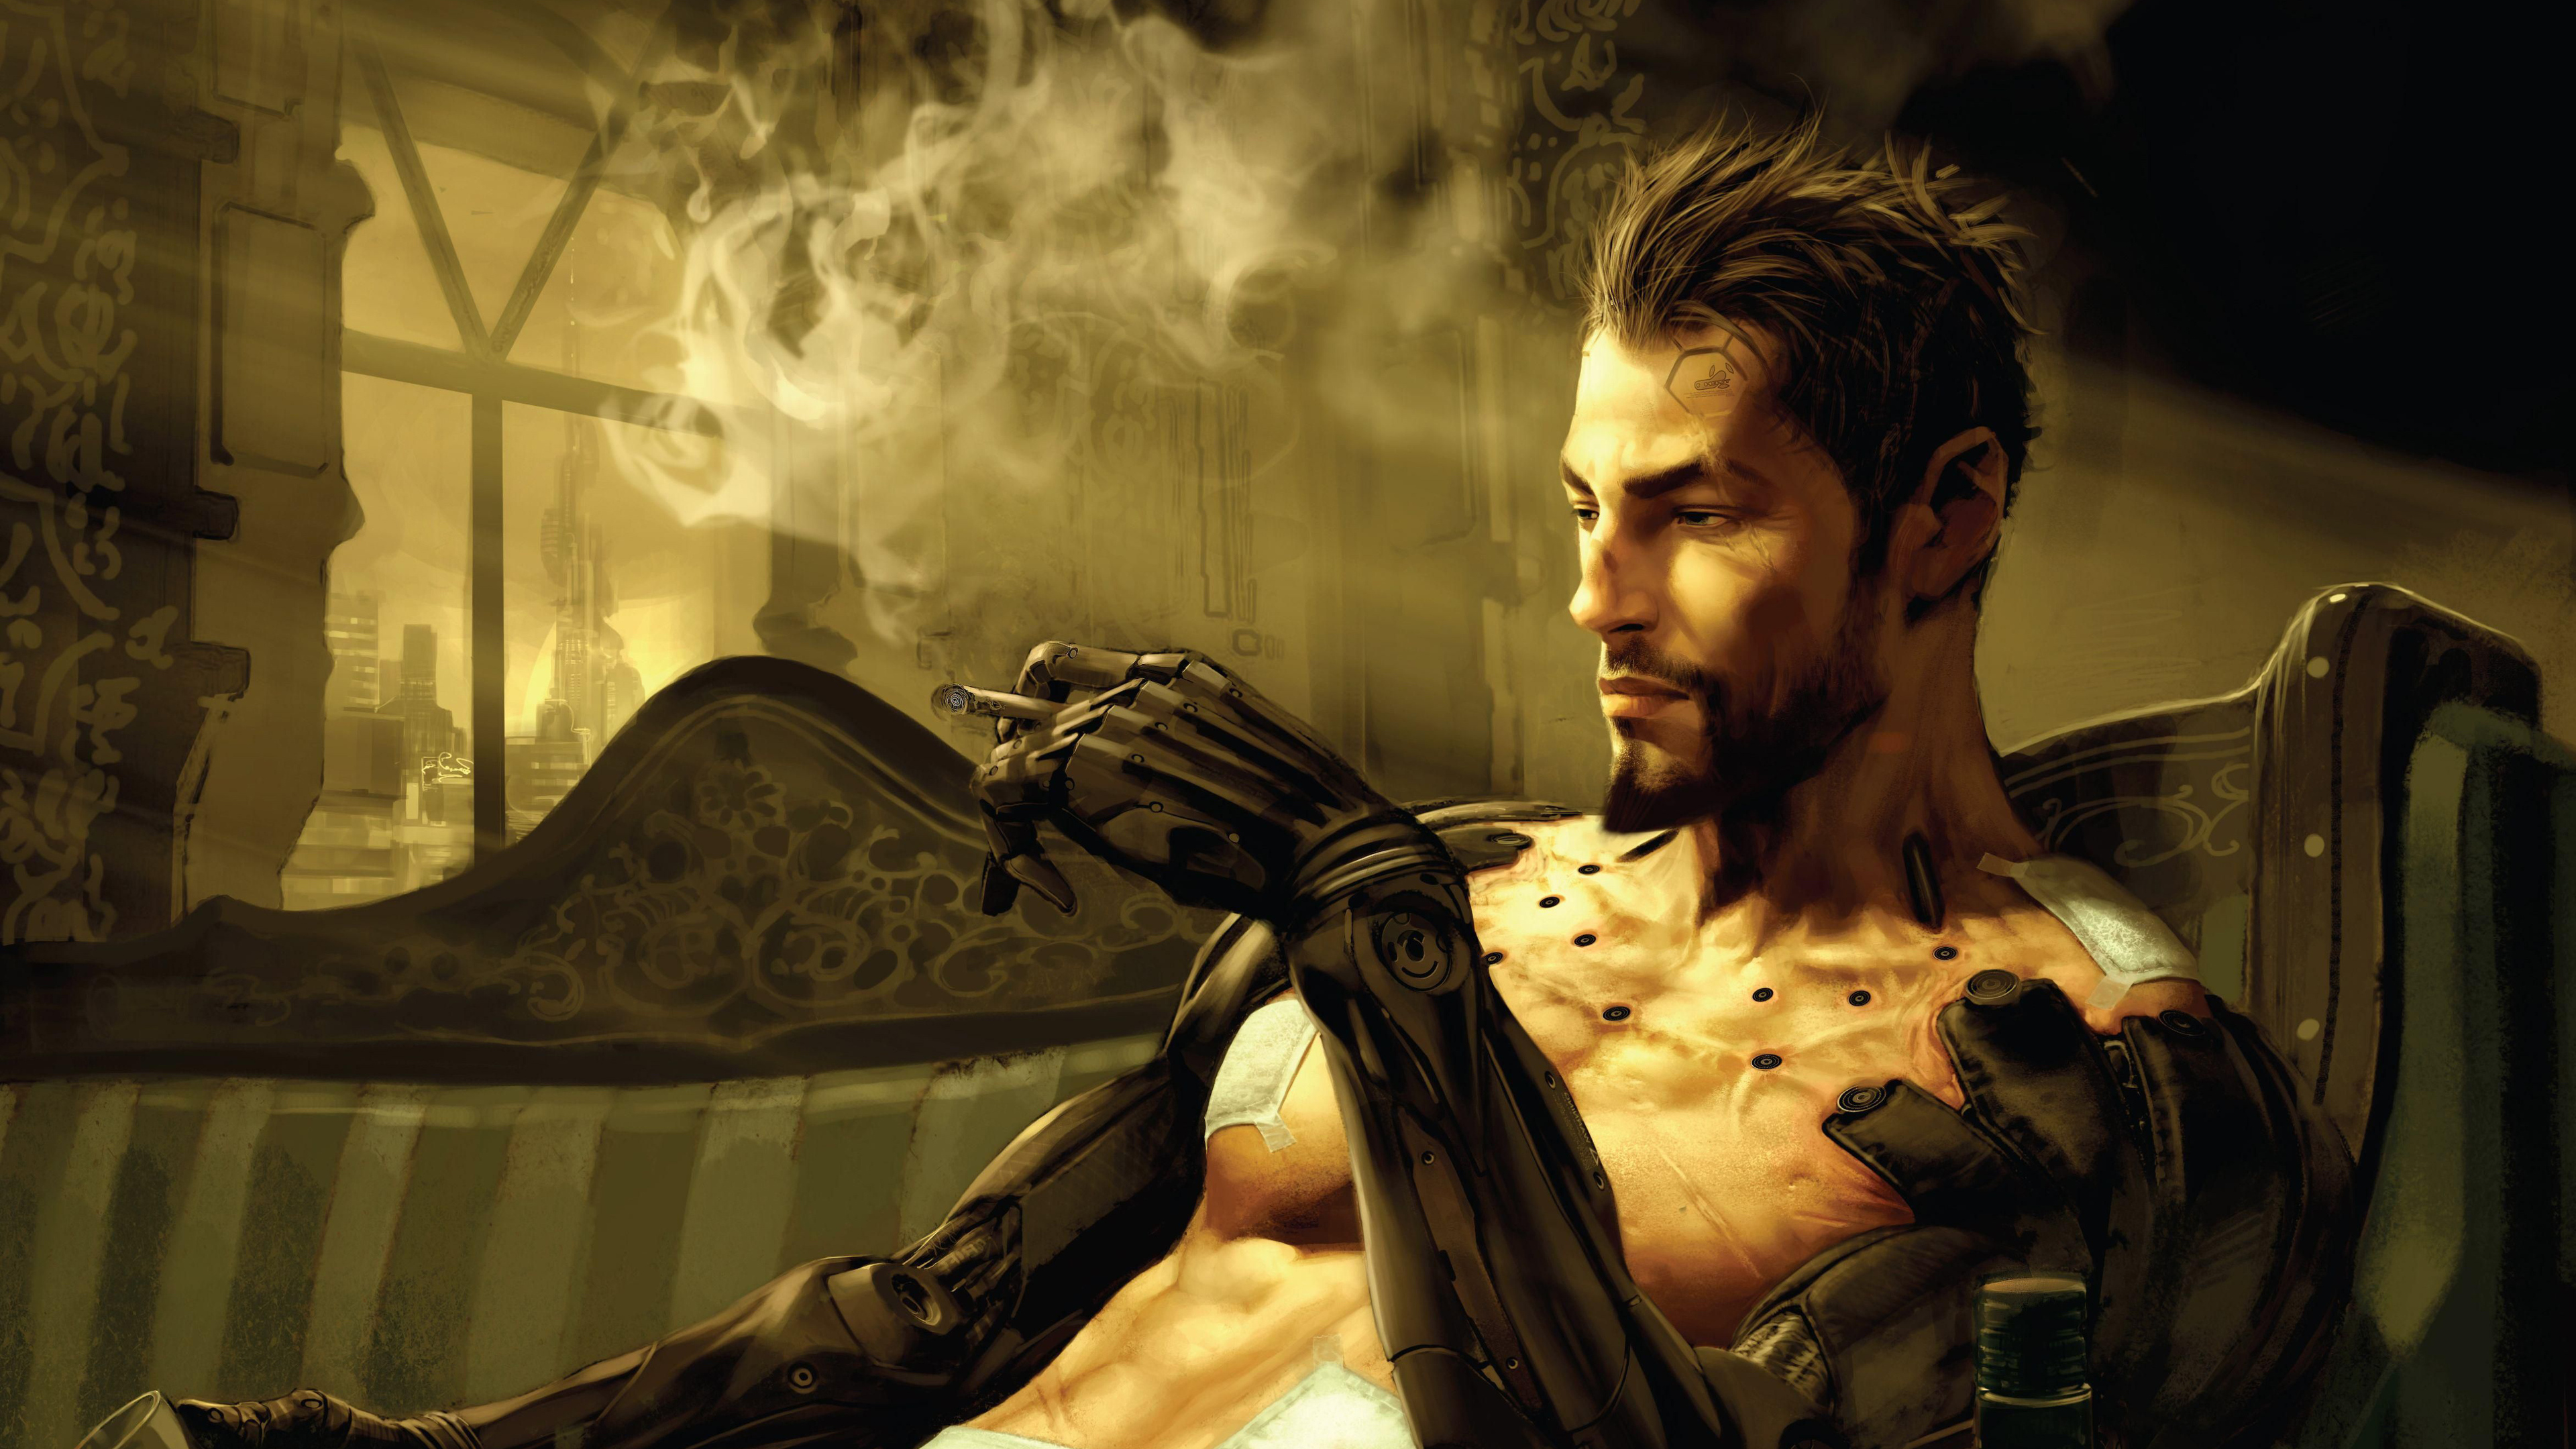 deus ex manking divided smoking and chill 4k 1553074667 - Deus Ex Manking Divided Smoking And Chill 4k - xbox games wallpapers, ps games wallpapers, pc games wallpapers, hd-wallpapers, games wallpapers, deus ex mankind divided wallpapers, 5k wallpapers, 4k-wallpapers